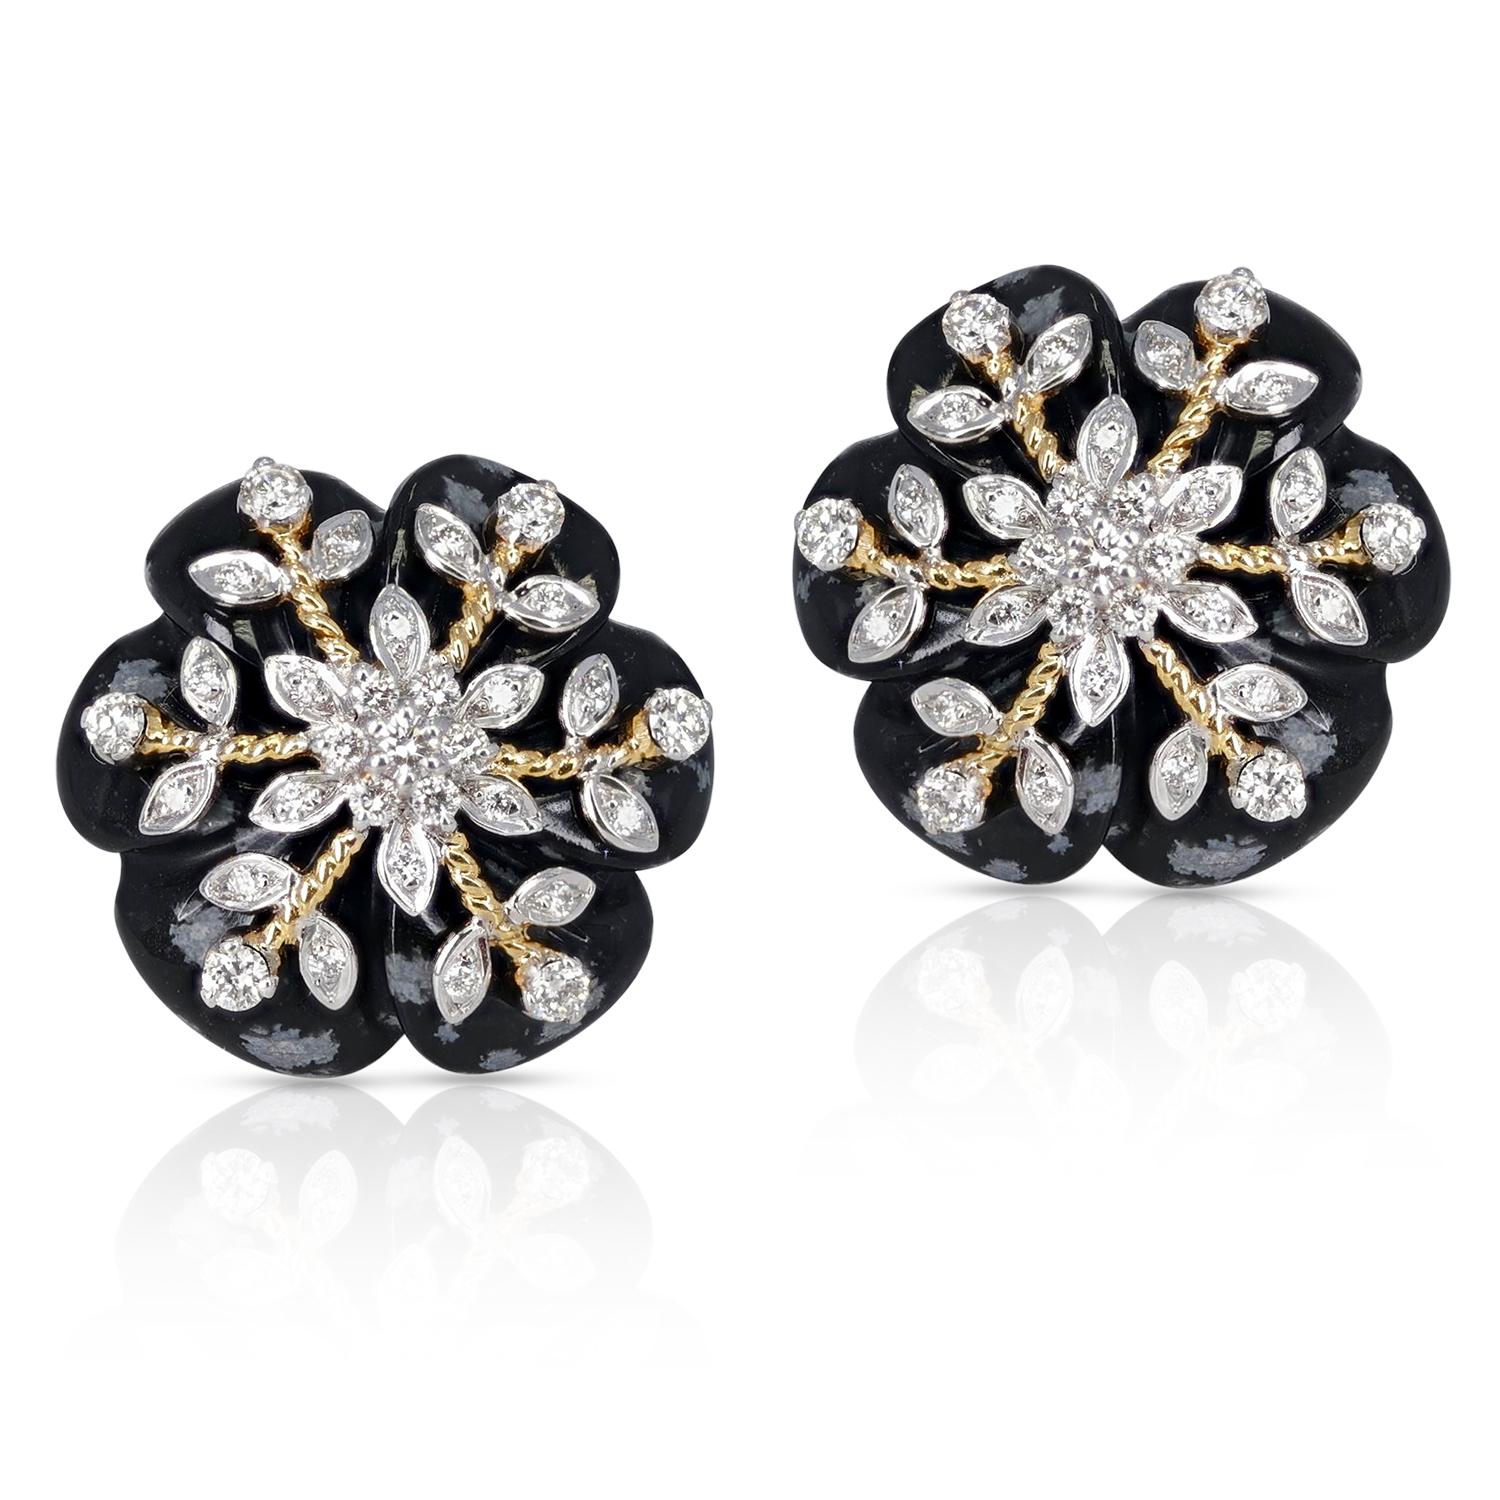 Round Cut 17.20 Ct. Snowflake Obsidian Earrings with 0.64 Ct. Diamonds, 14k For Sale